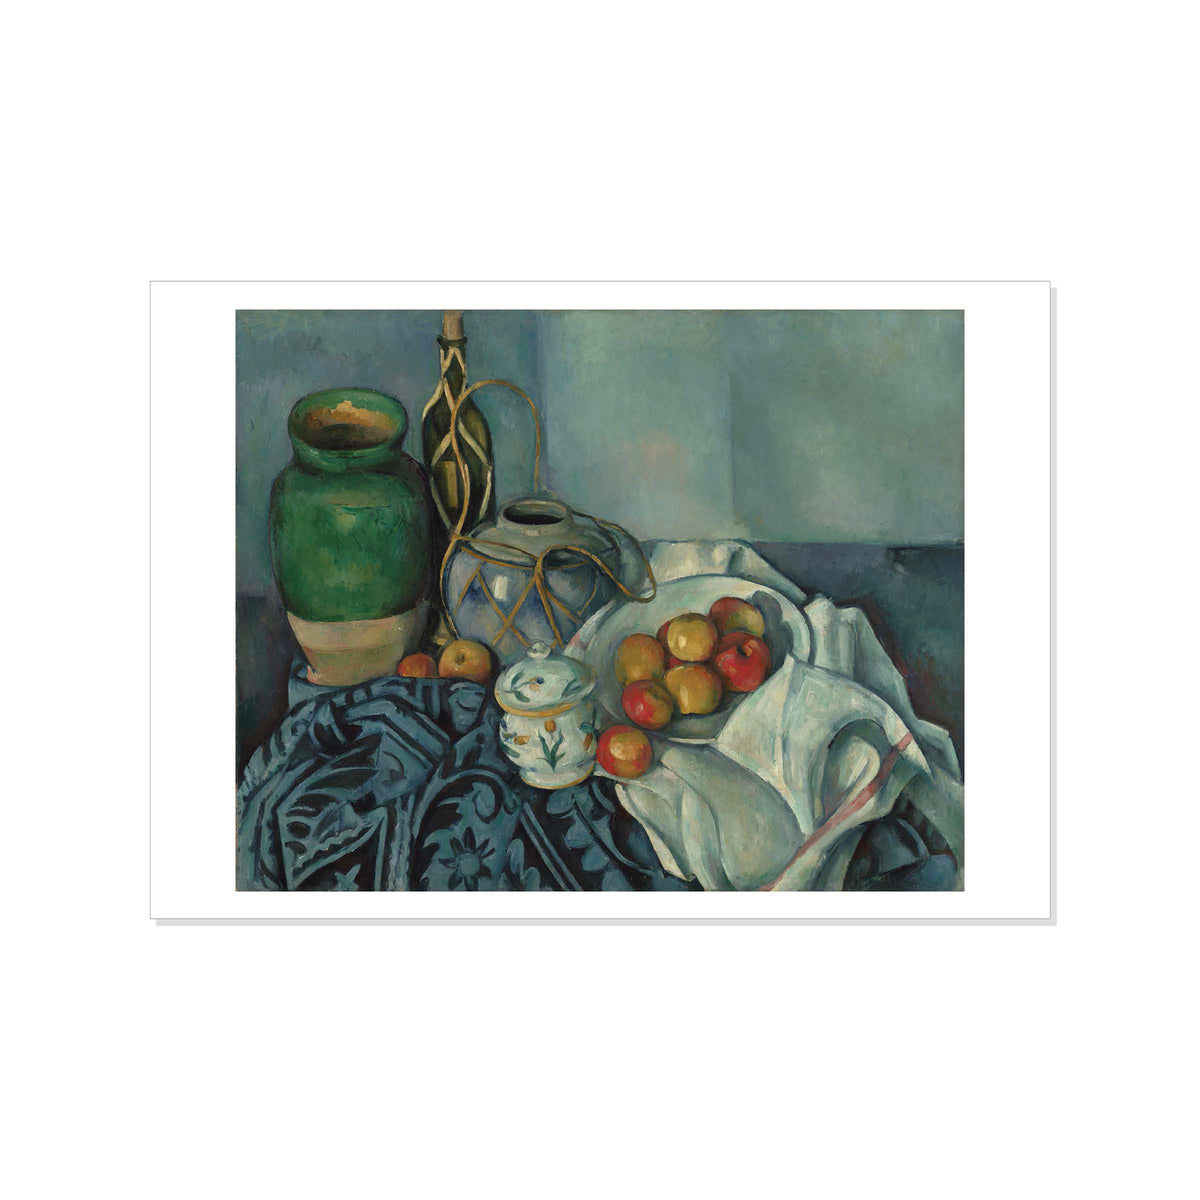 Cezanne - Still Life with Apples - Postcard